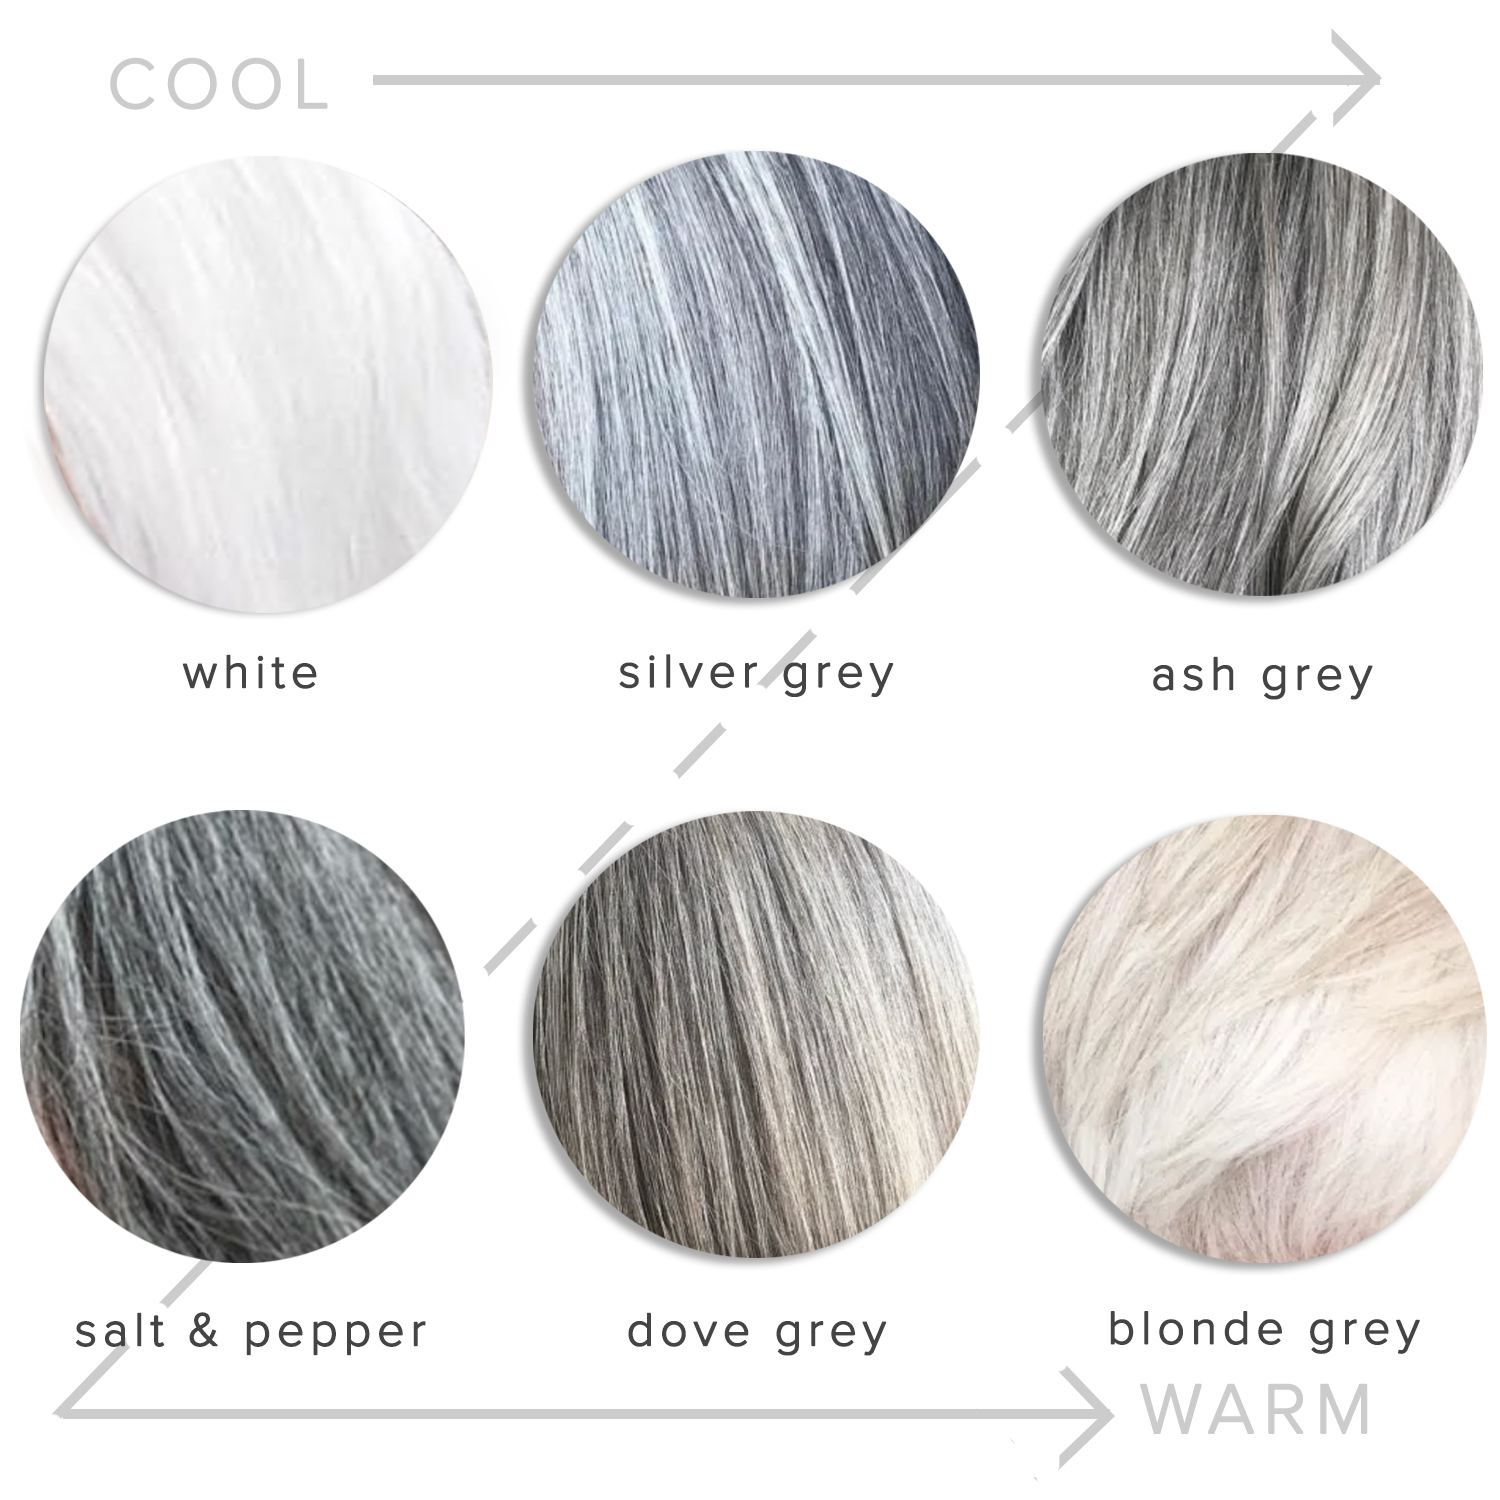 Let's talk about Grey… hair